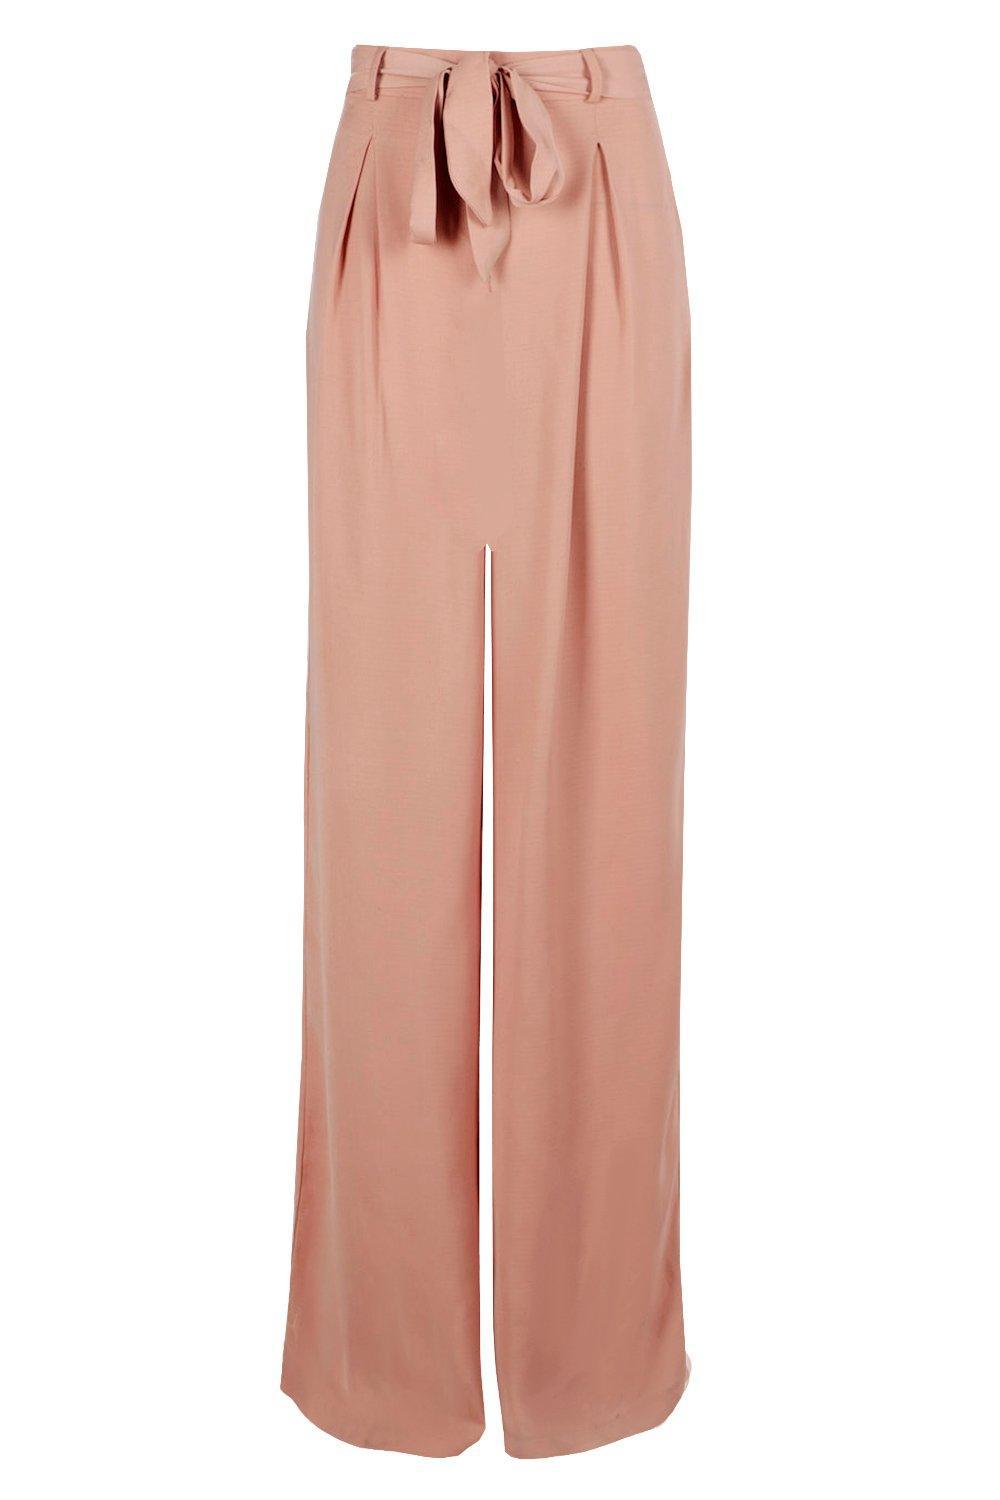 Lyst - Boohoo Tall Lorna Woven Front Tie Detail Wide Leg Trouser in Pink